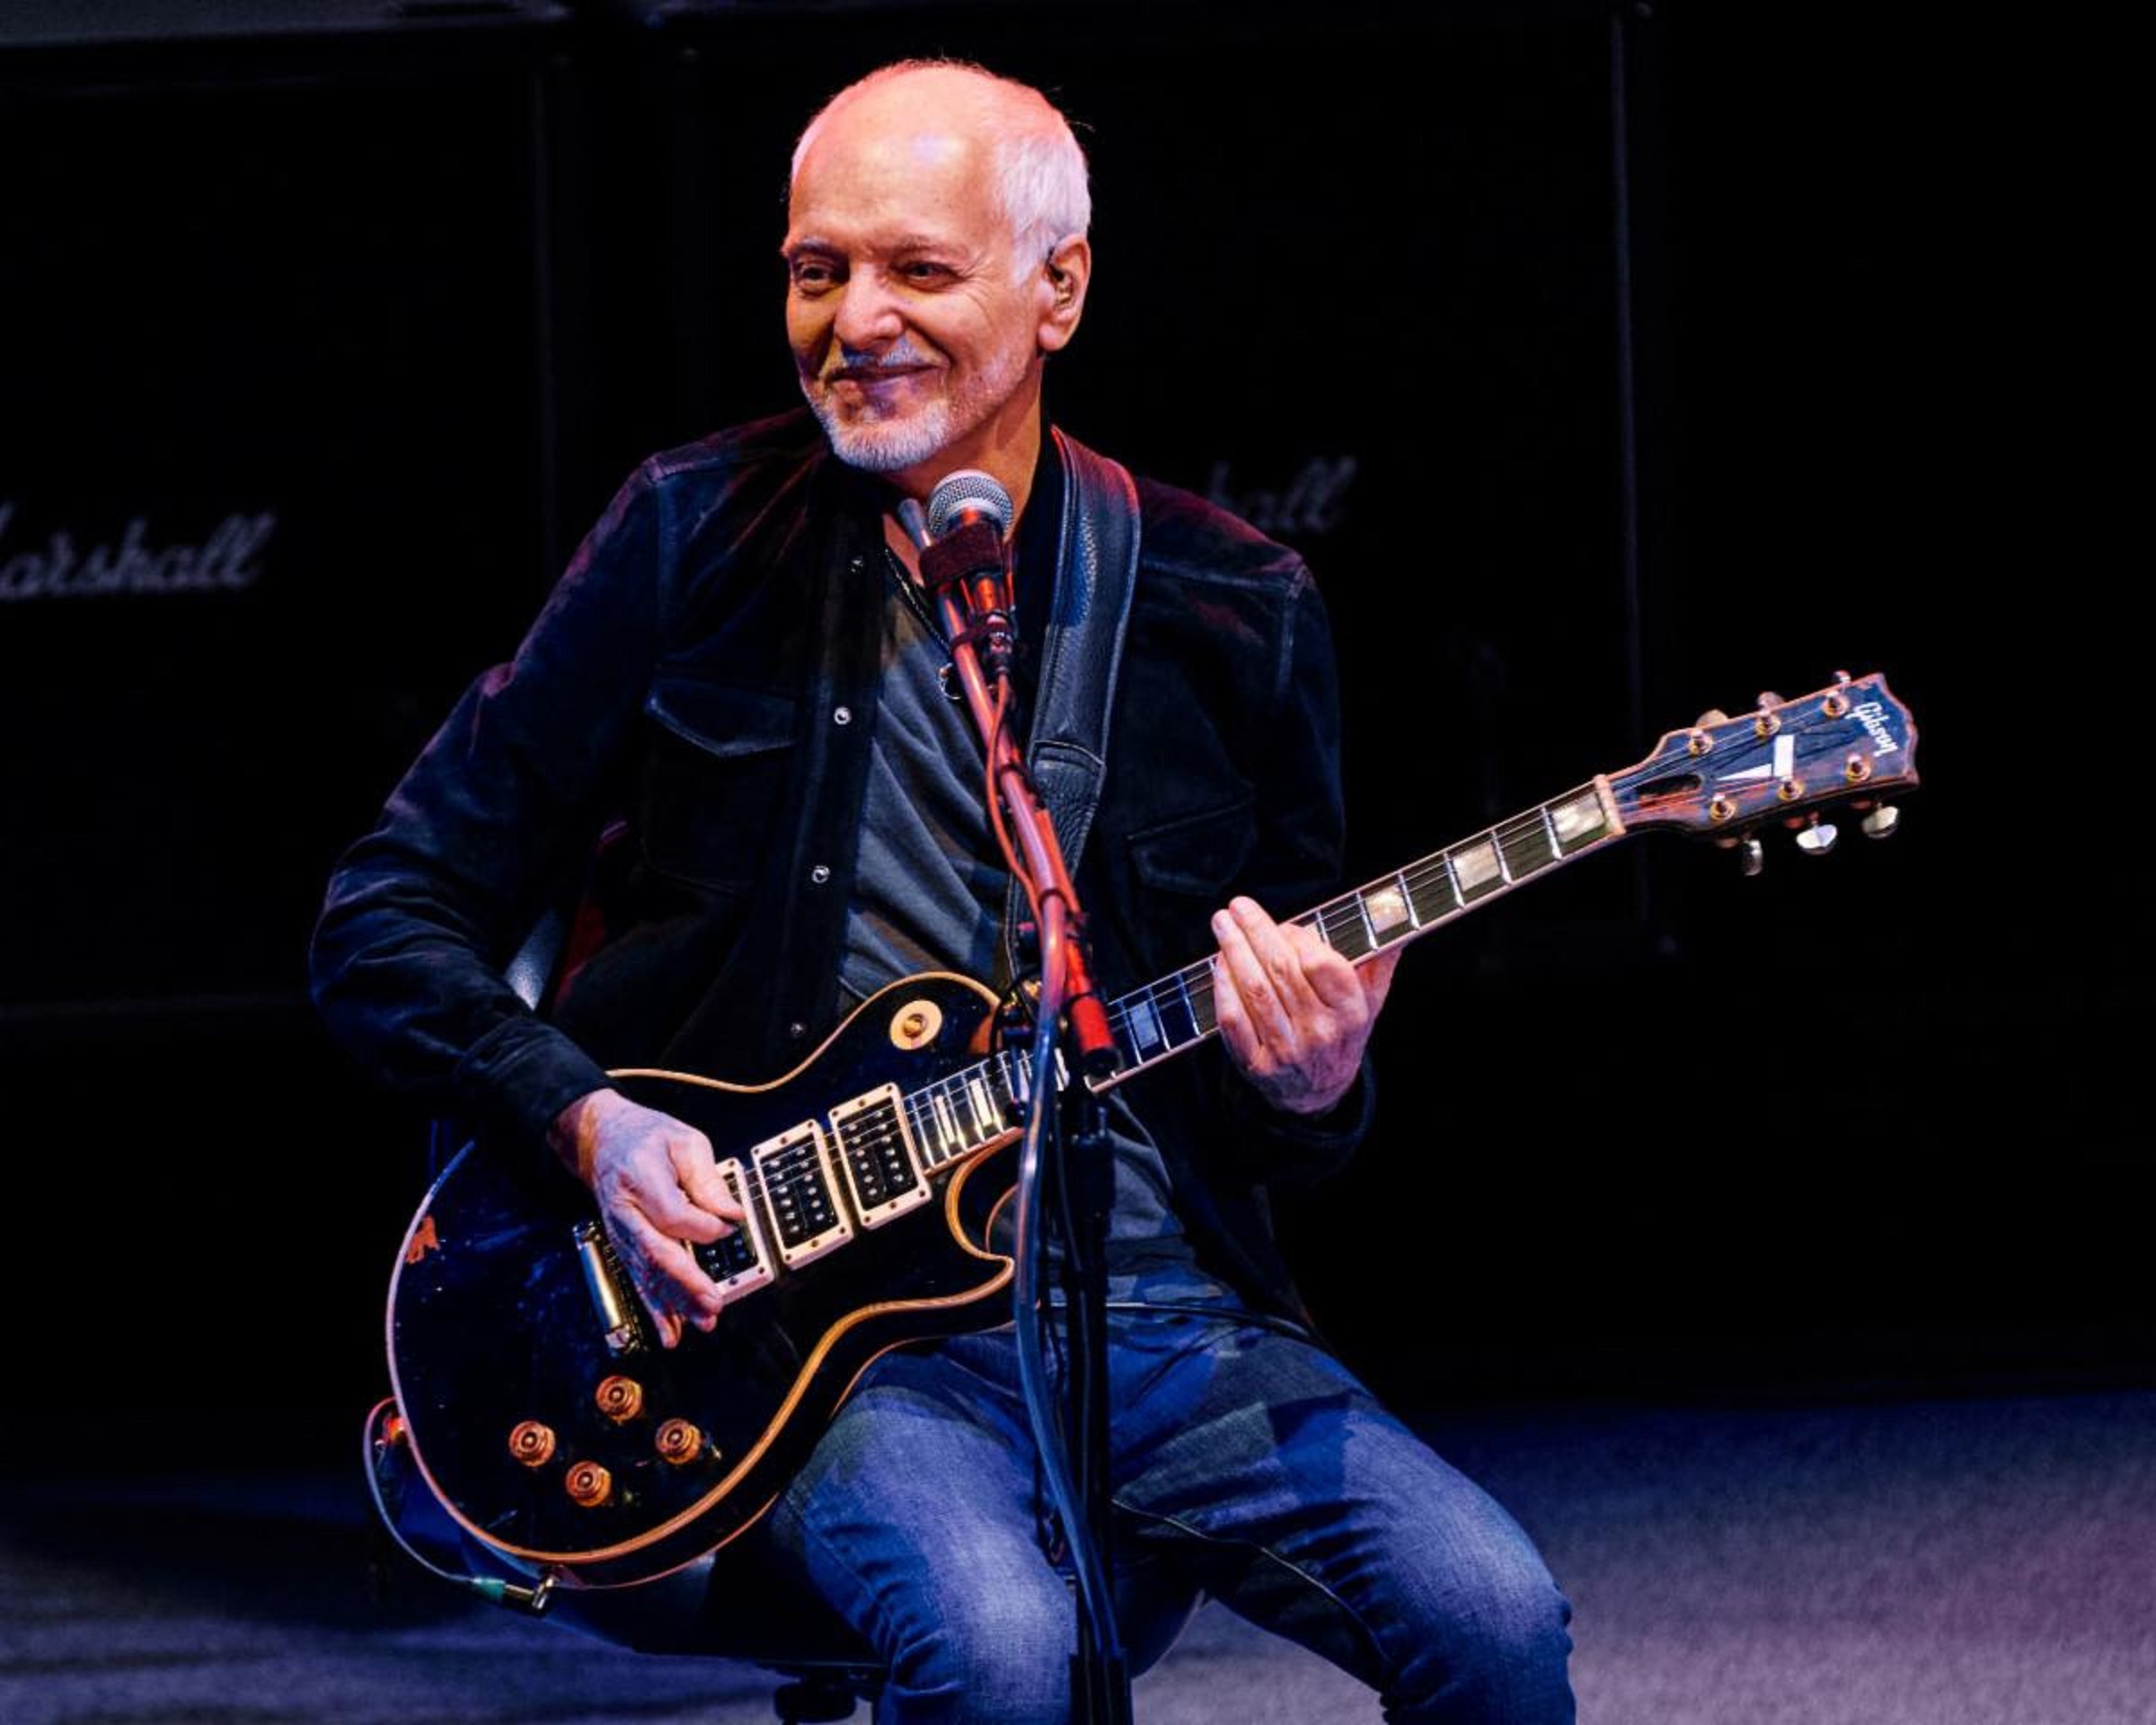 Peter Frampton: Legendary Musician to be Honored with Annual Les Paul Spirit Award on Sunday, June 9, at the Gibson Garage Nashville at 6:30 PM